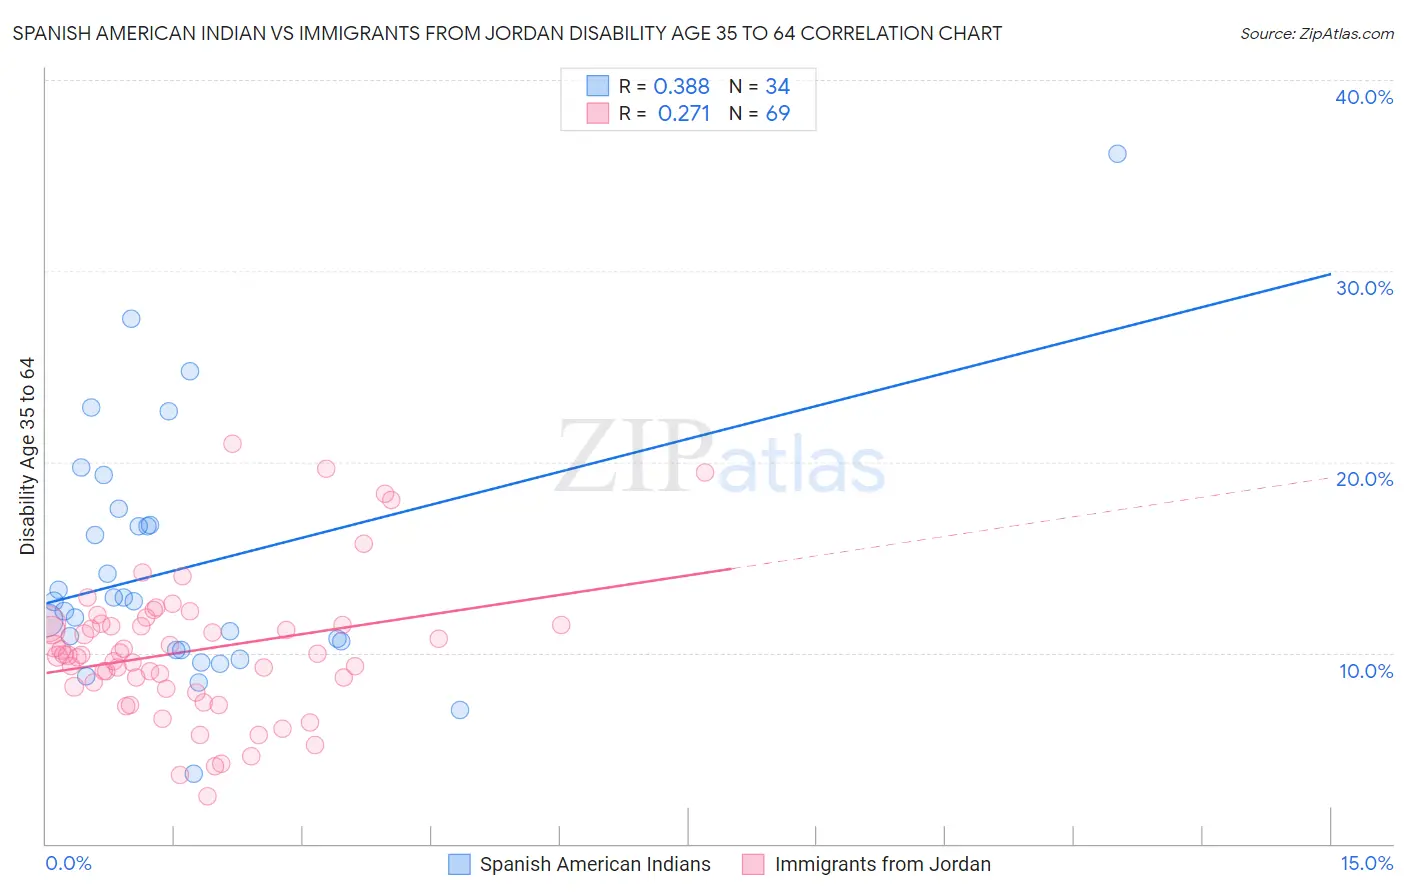 Spanish American Indian vs Immigrants from Jordan Disability Age 35 to 64